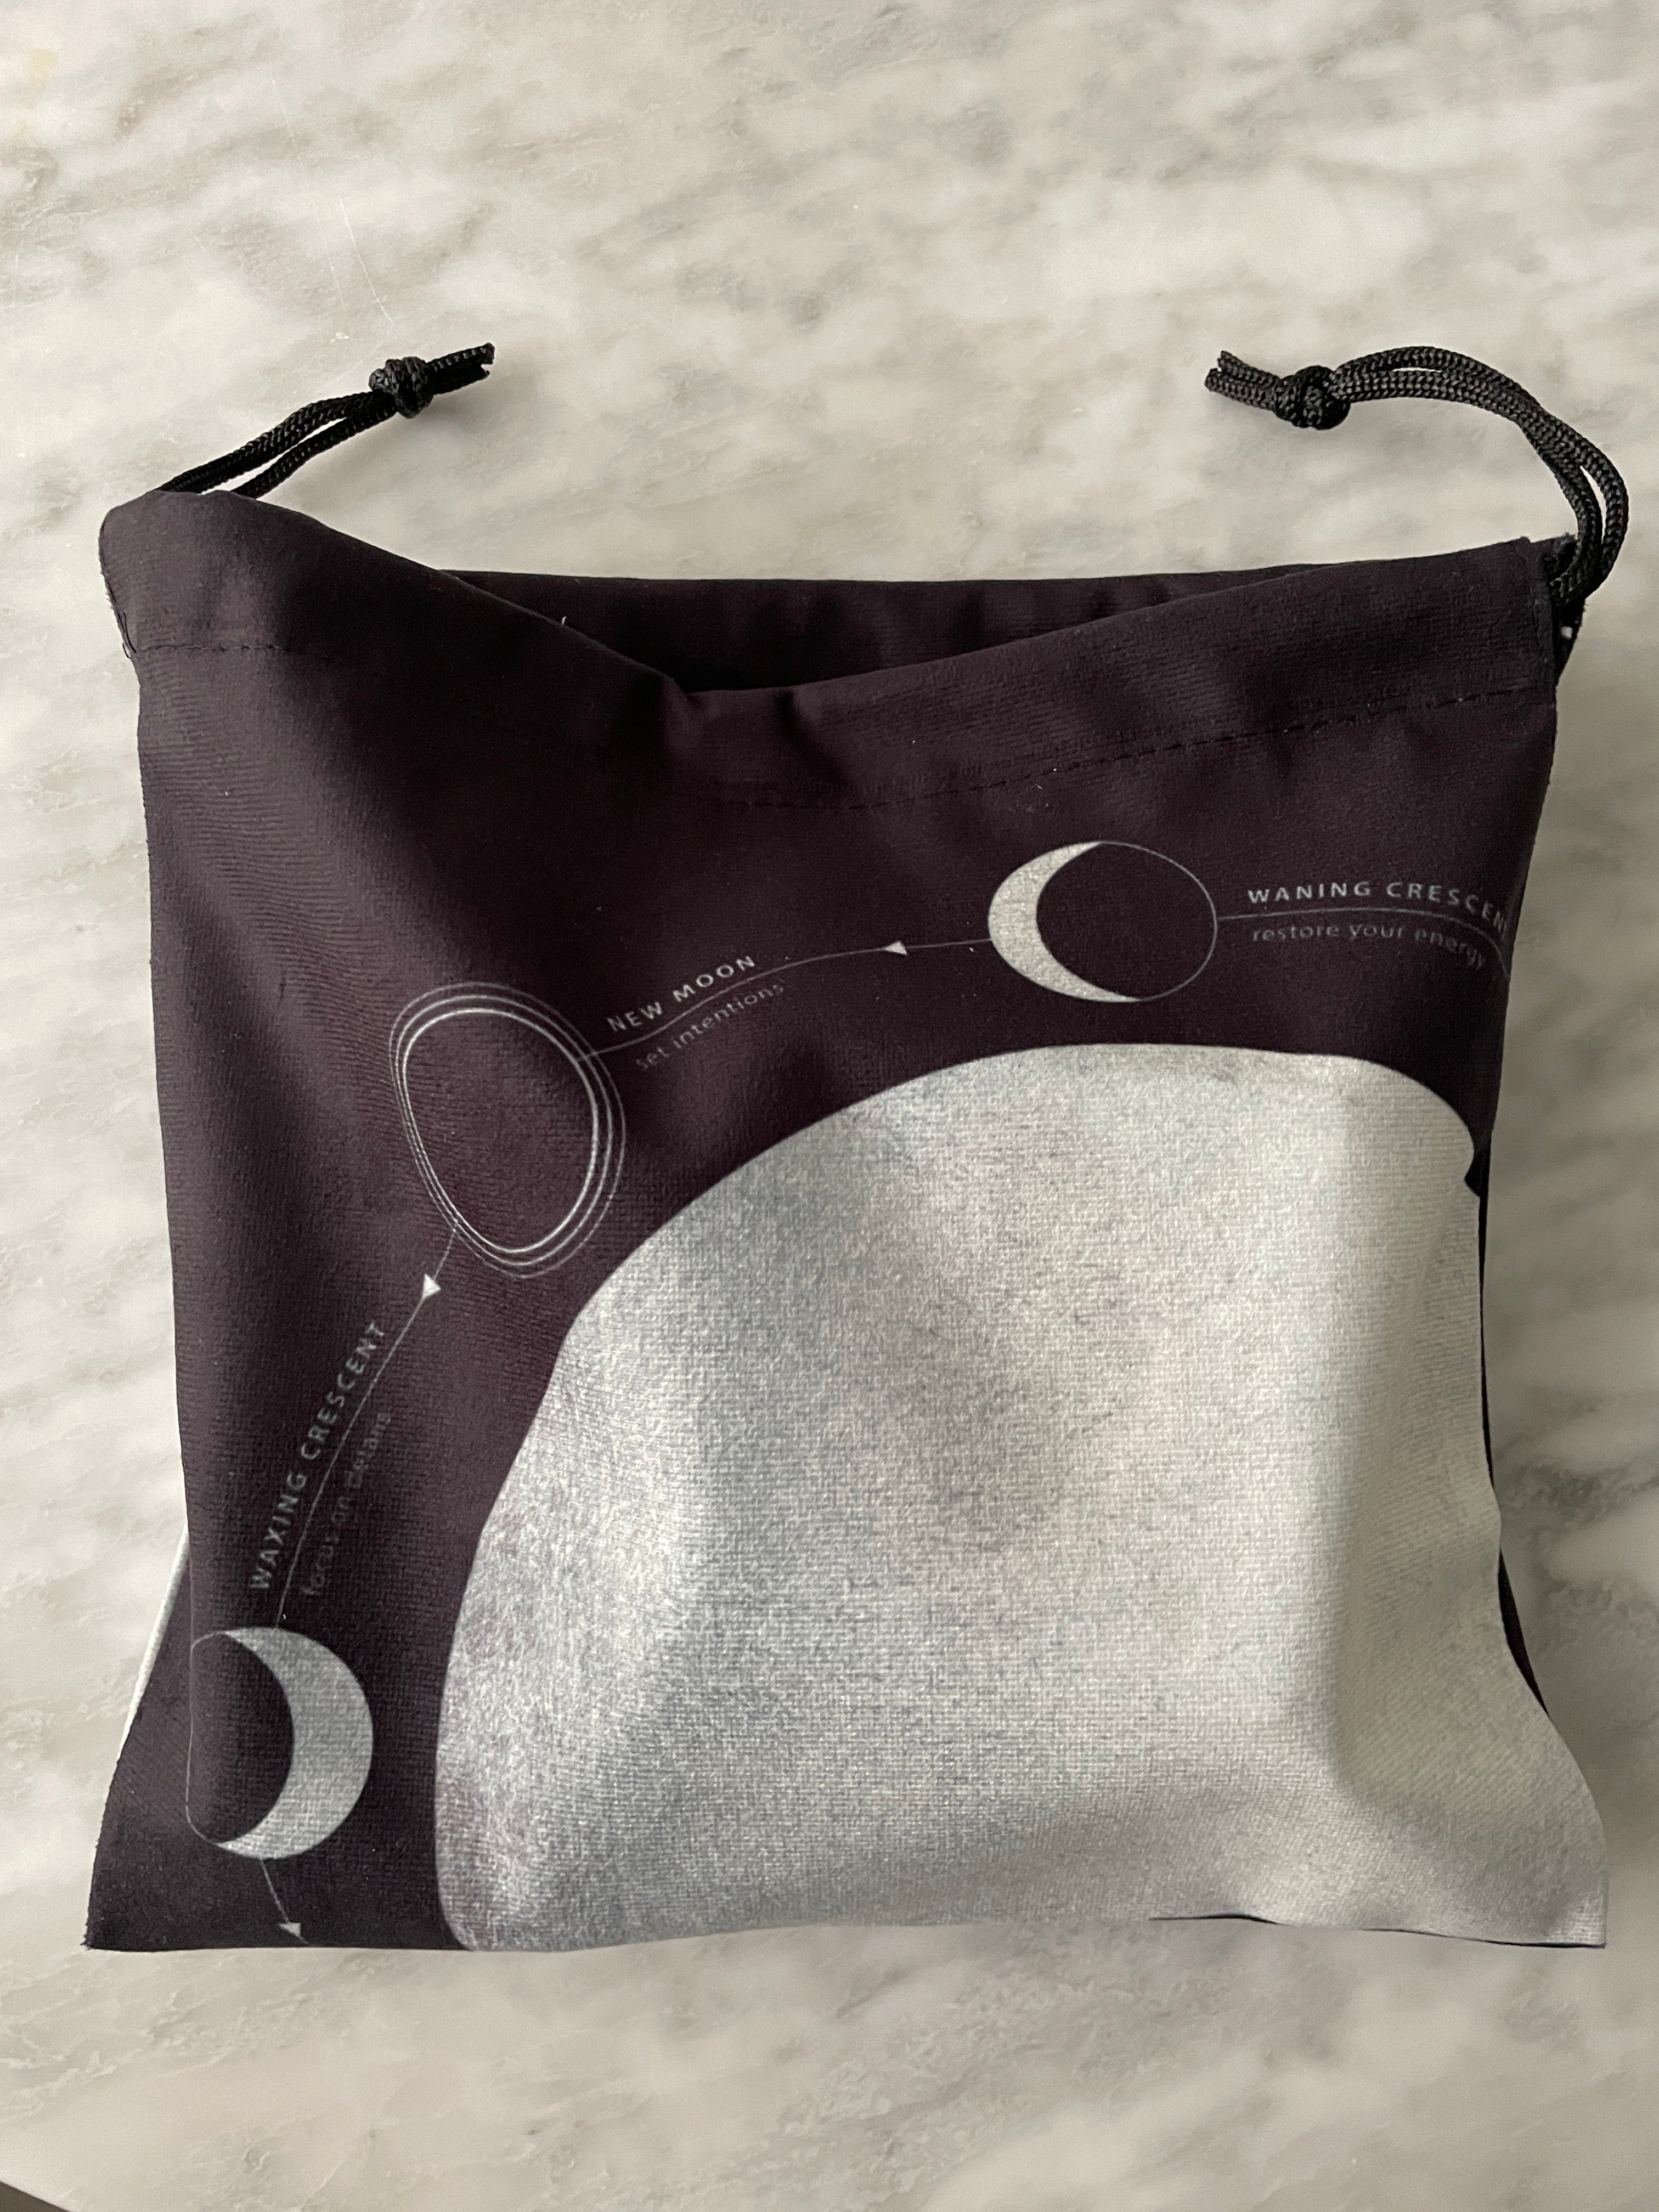 Velvet bag, LARGE: Moon Phases, large 9.5 inches x 9.5 inches